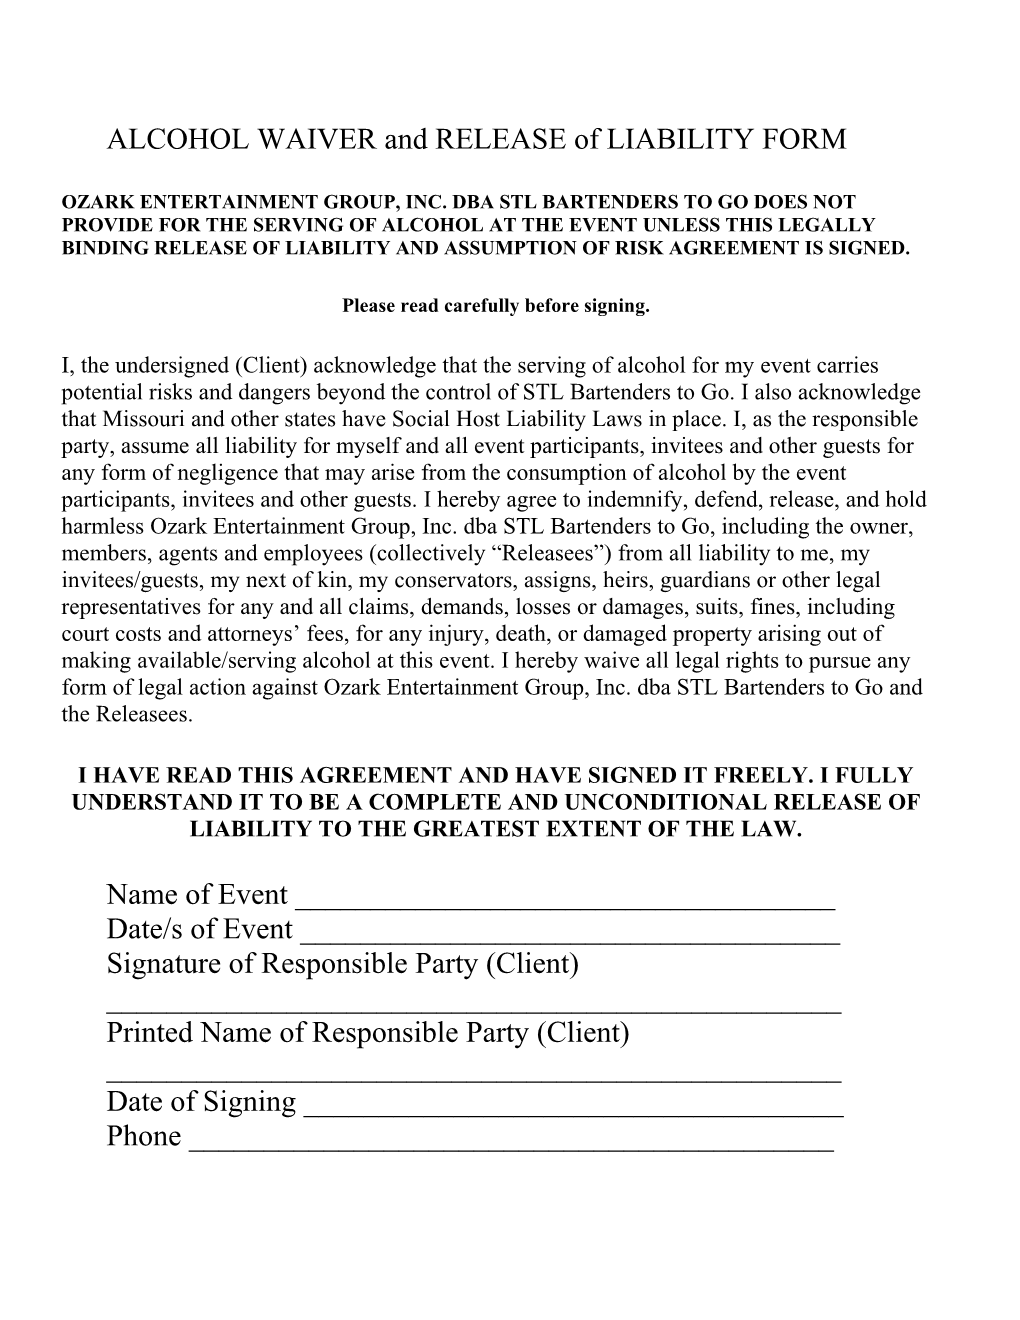 ALCOHOL WAIVER and RELEASE of LIABILITY FORM the Cabin Ridge Does Not Recommend Or Provide